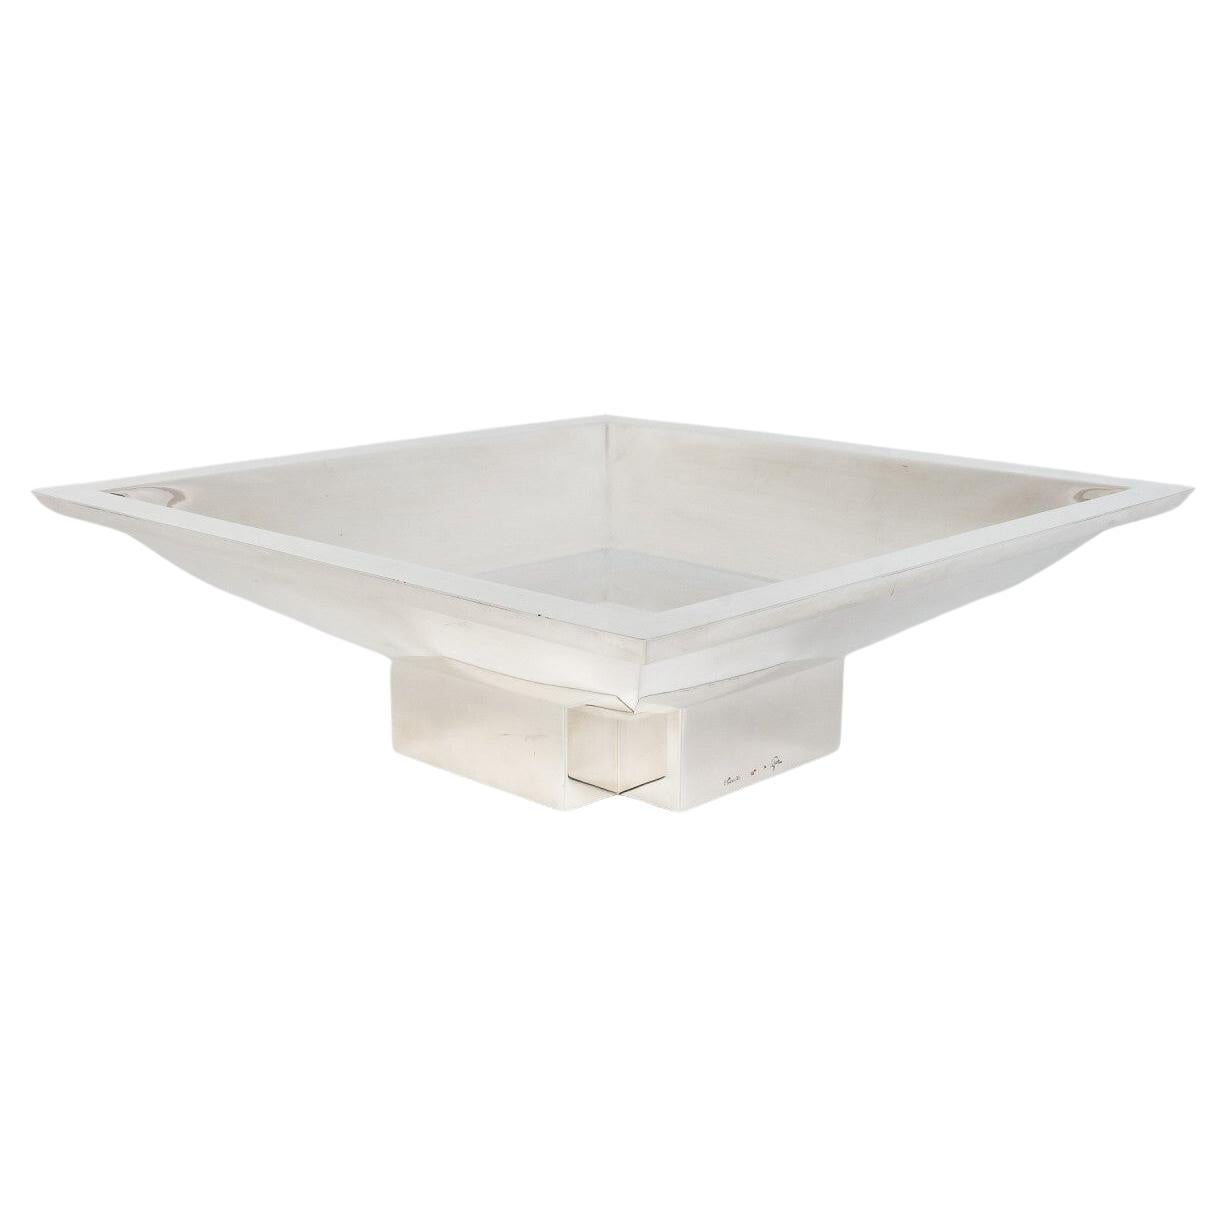 D. GARRIDO – Square Centerpiece In Sterling Silver 20th